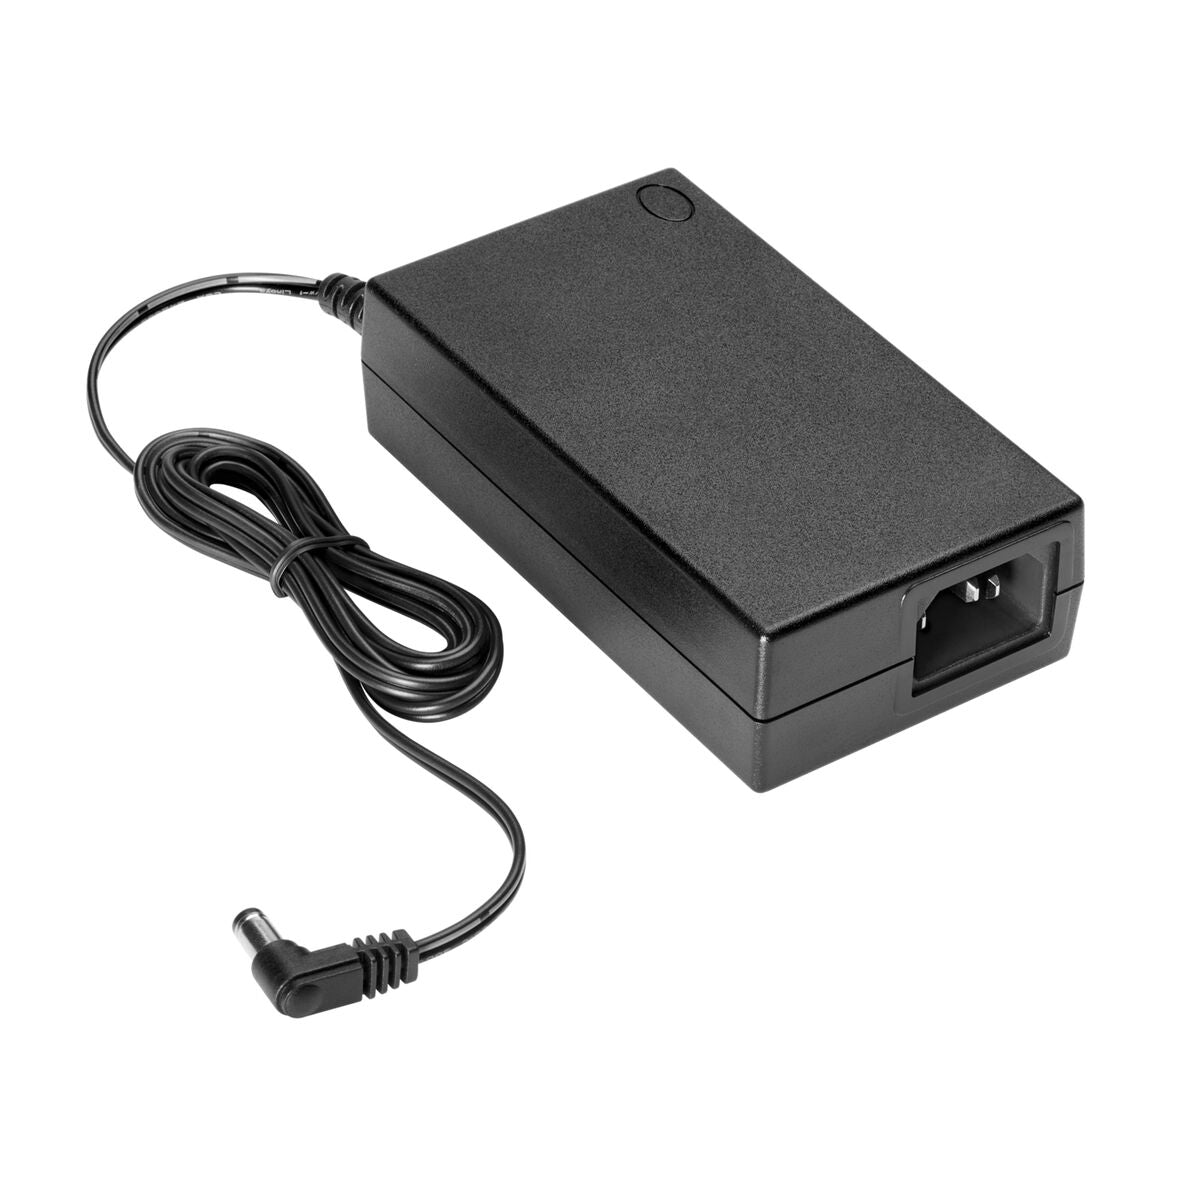 Power supply HPE R9M79A, HPE, Computing, Components, power-supply-hpe-r9m79a, Brand_HPE, category-reference-2609, category-reference-2803, category-reference-2816, category-reference-t-19685, category-reference-t-19912, category-reference-t-21360, computers / components, Condition_NEW, ferretería, Price_20 - 50, Teleworking, RiotNook